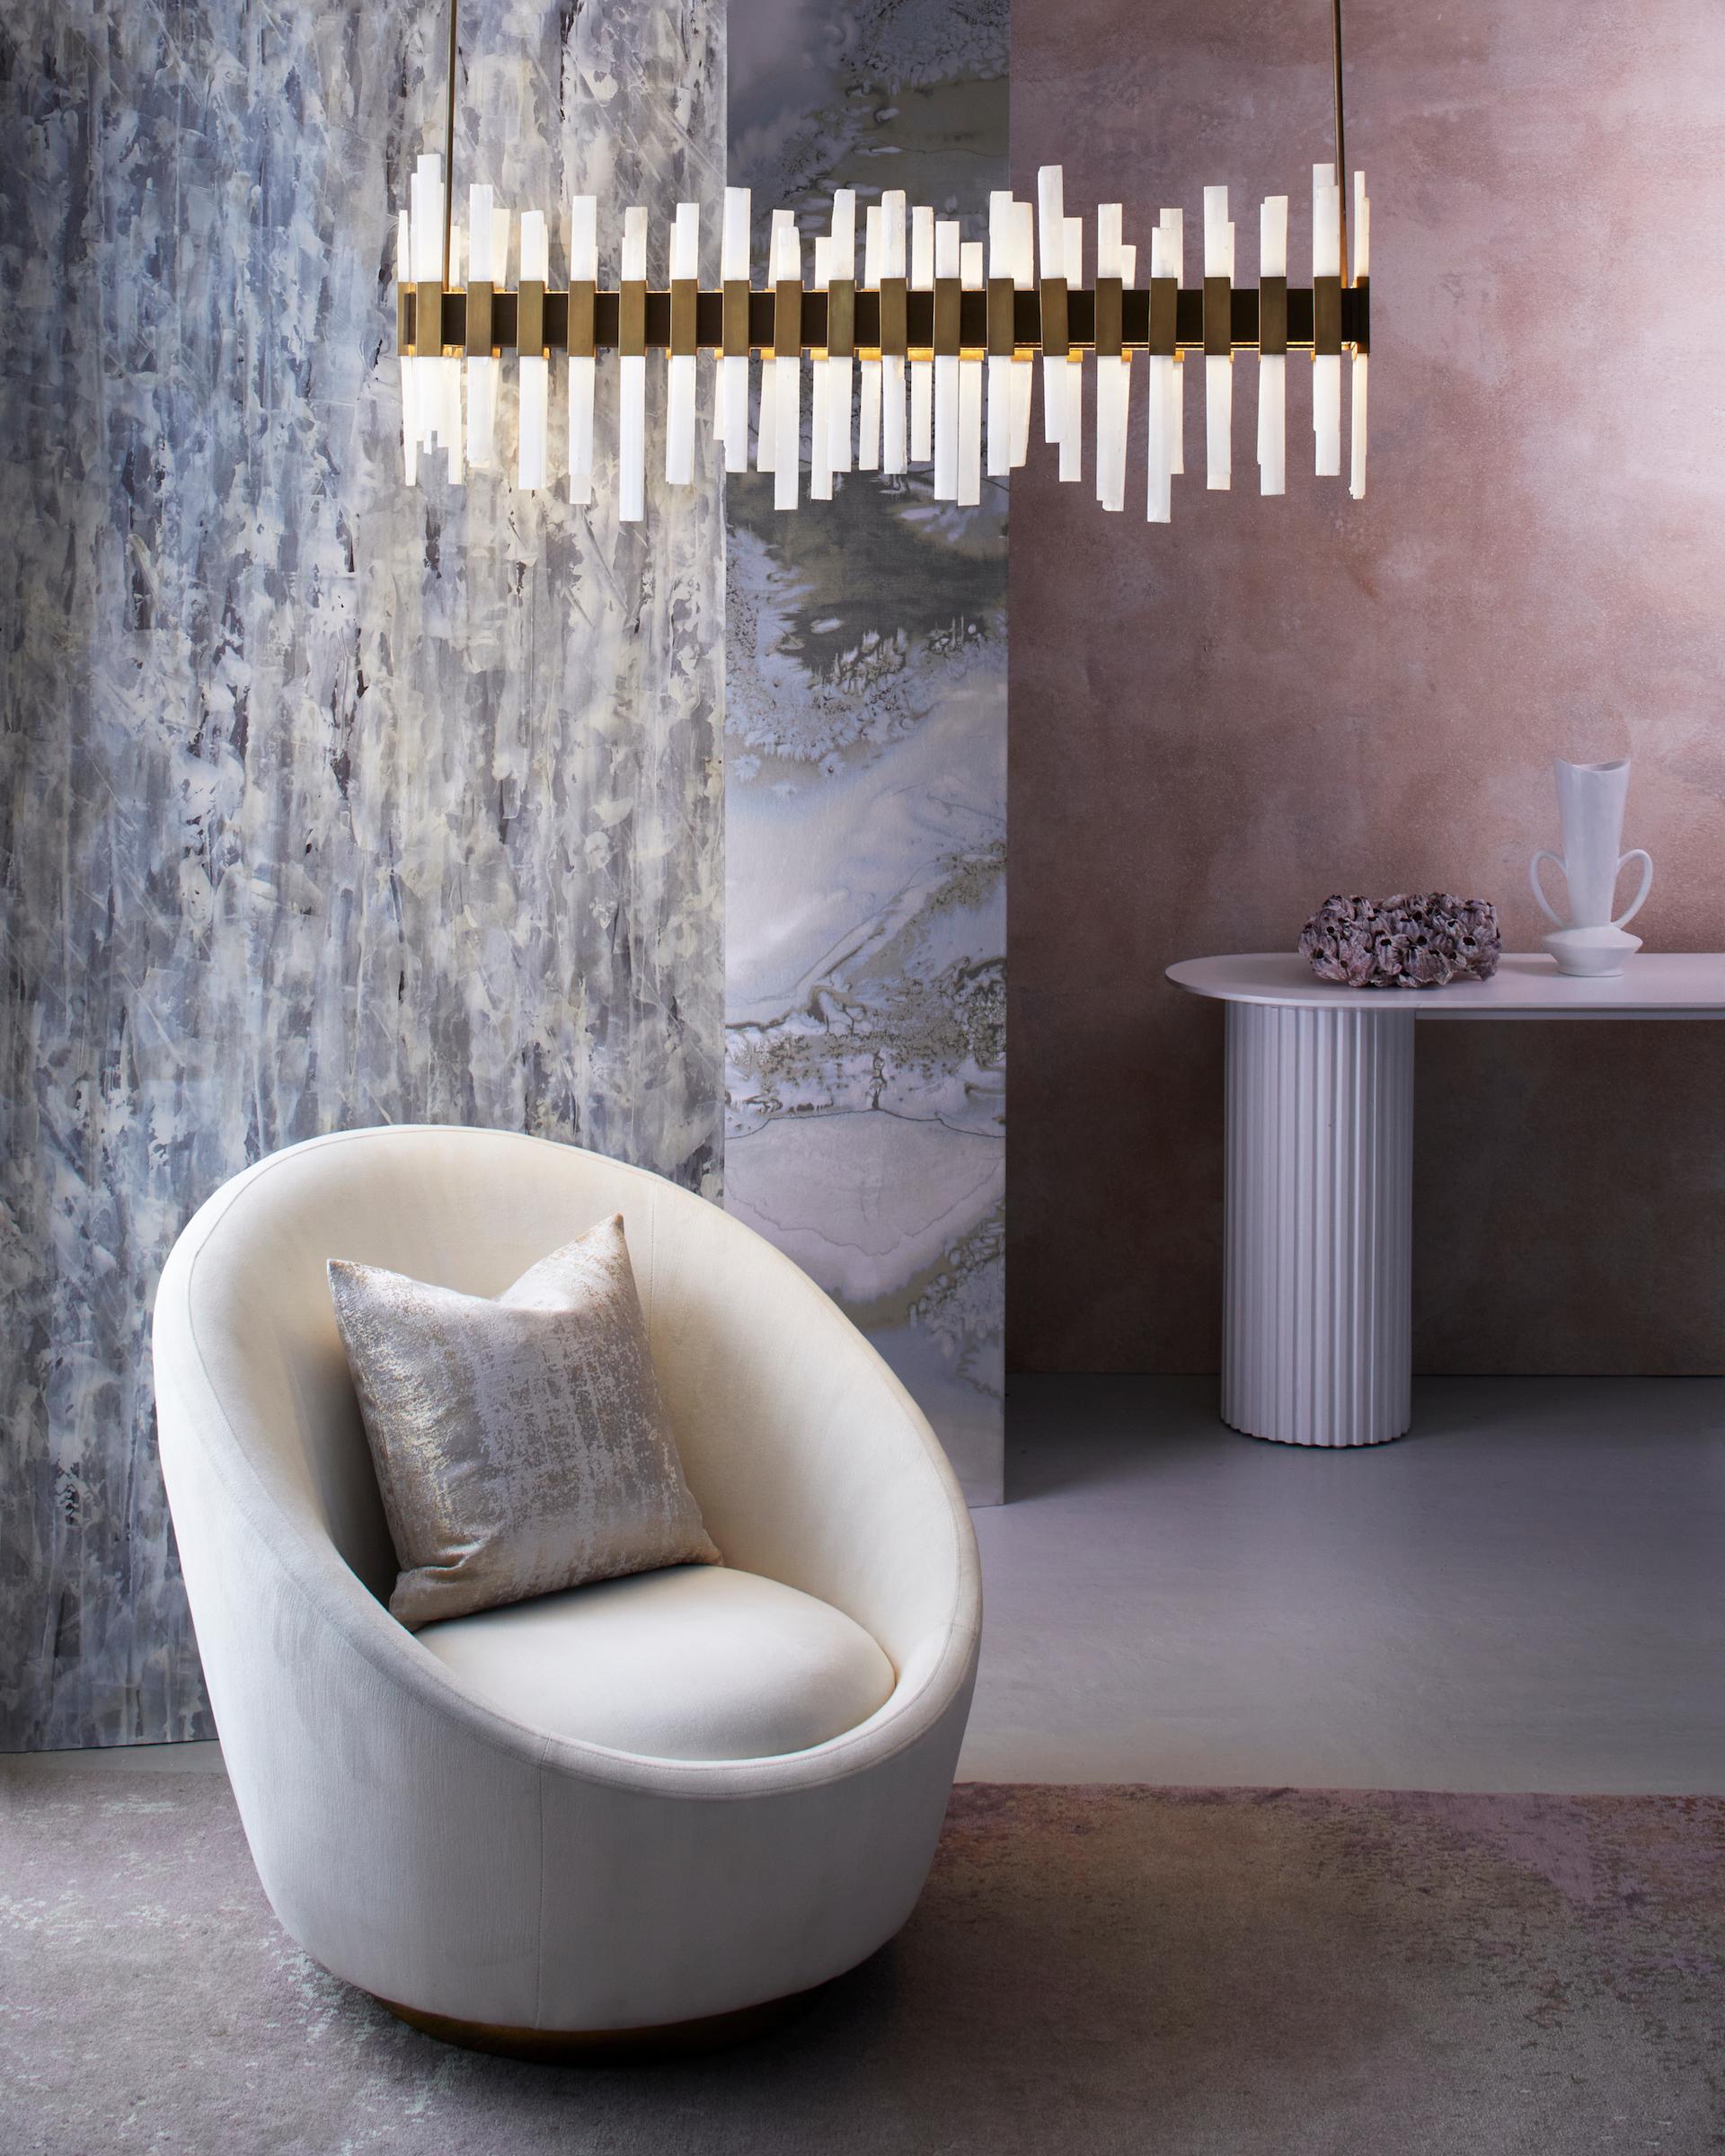 Our beautiful Livara chandelier is delicately handcrafted in bronze with rectangular rock crystal rods adorning the bespoke bronze frame. Seen here in our popular Antique Brass finish, we can amend measurements to suit your needs. It sits